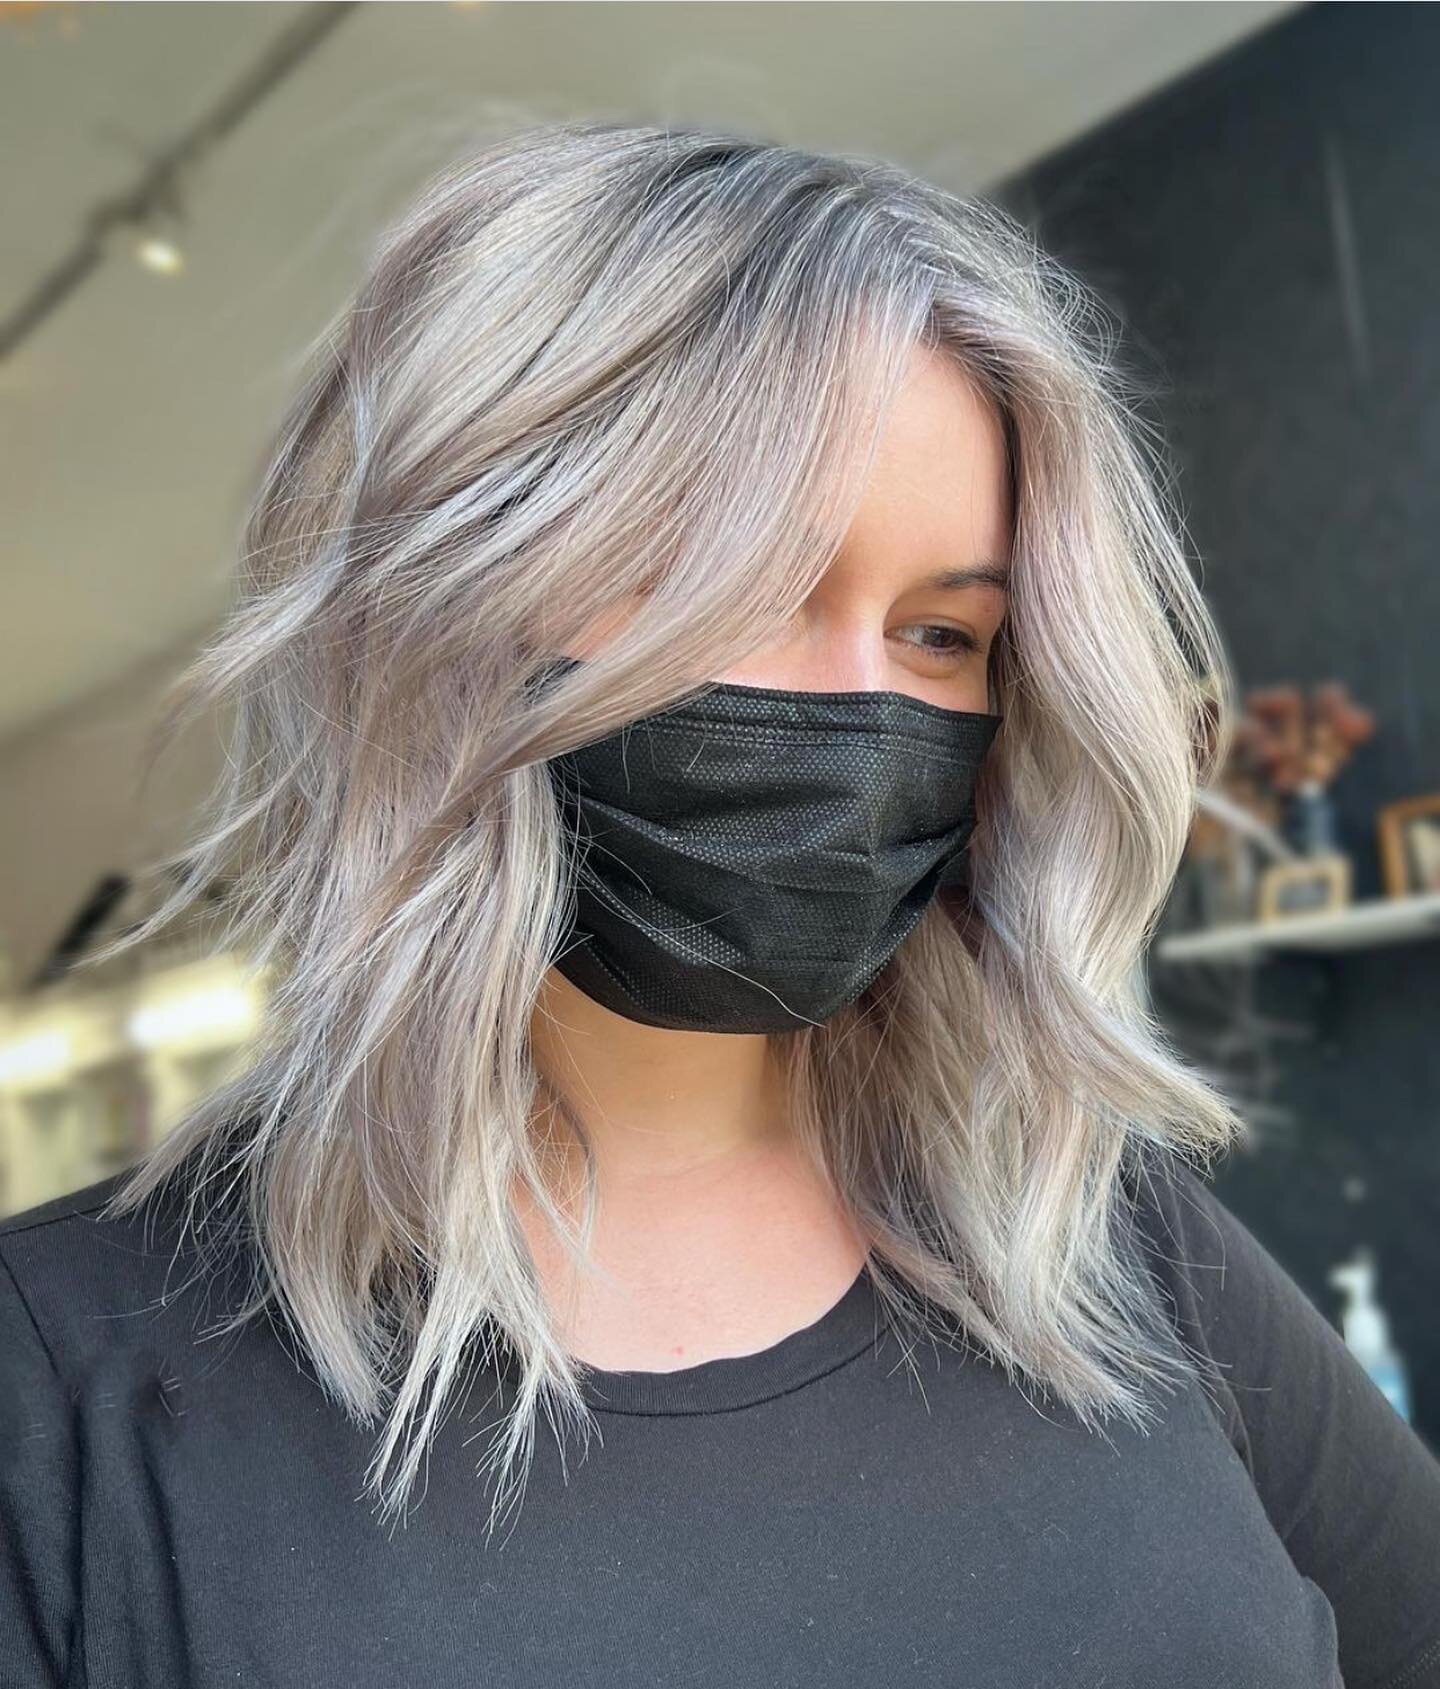 We love this end of summer beachy vibe by @bahm_hair!
.
#mastersofbalayage #balayage #beachyhair #coolblonde #beachwaves #behindthechair #loma #guytang #blondesolutions #amika #pulpriot #fishtown #phillycolorist #phillyhair #cultstudio